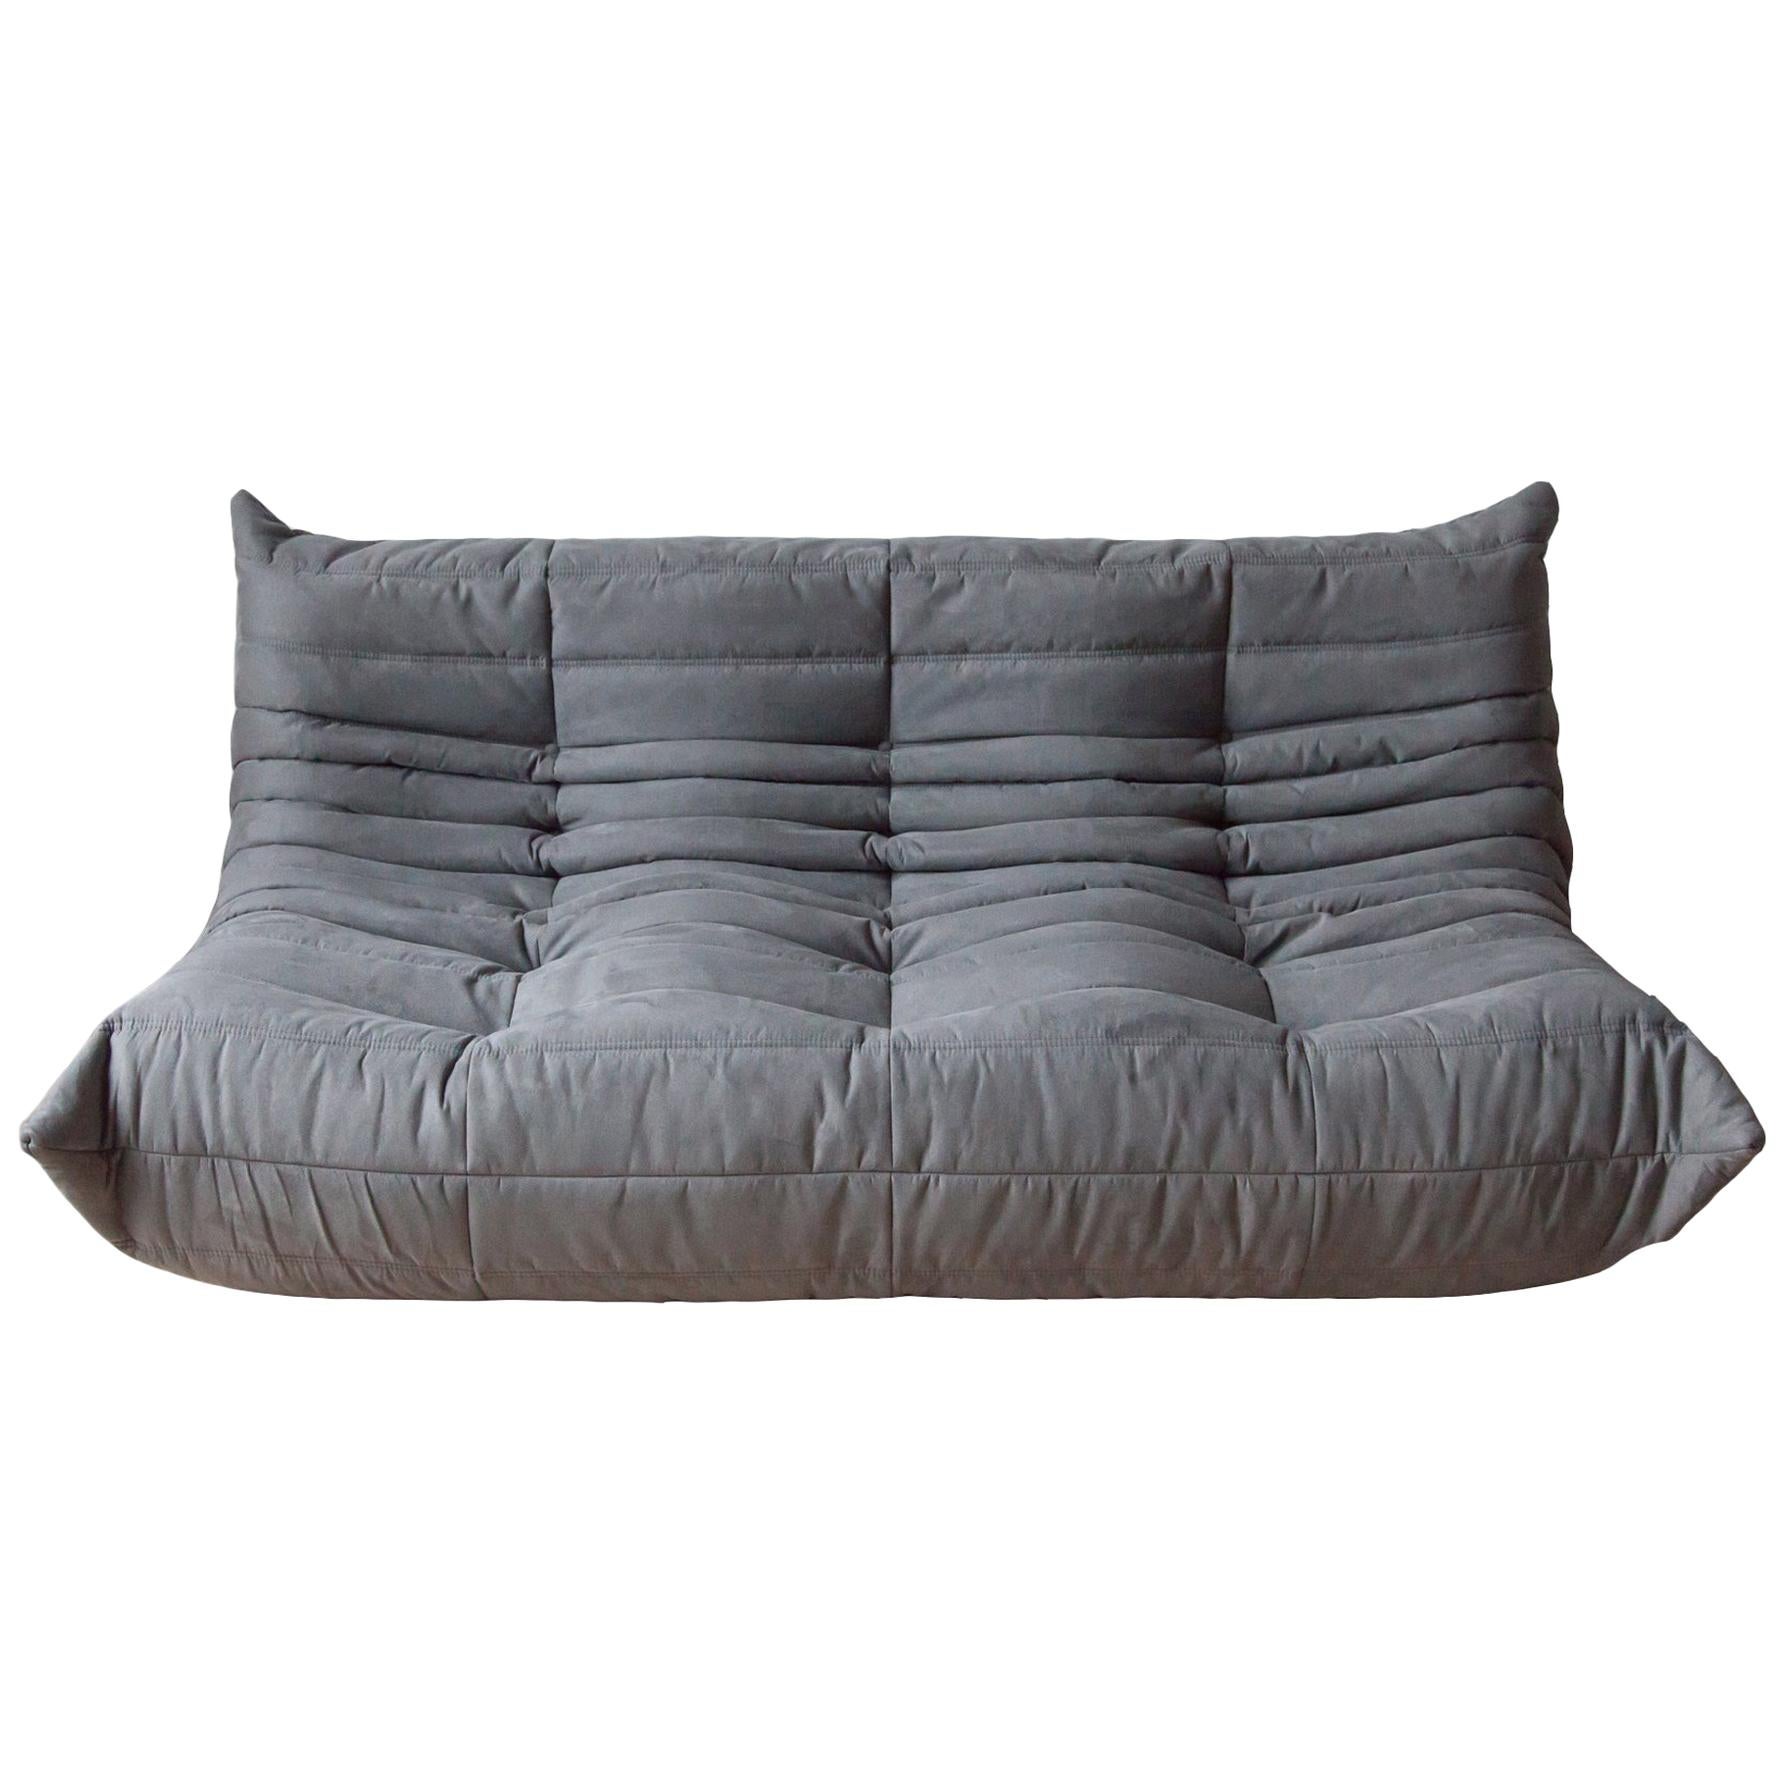 Togo 3-Seat Sofa in Grey Microfibre by Michel Ducaroy for Ligne Roset For Sale